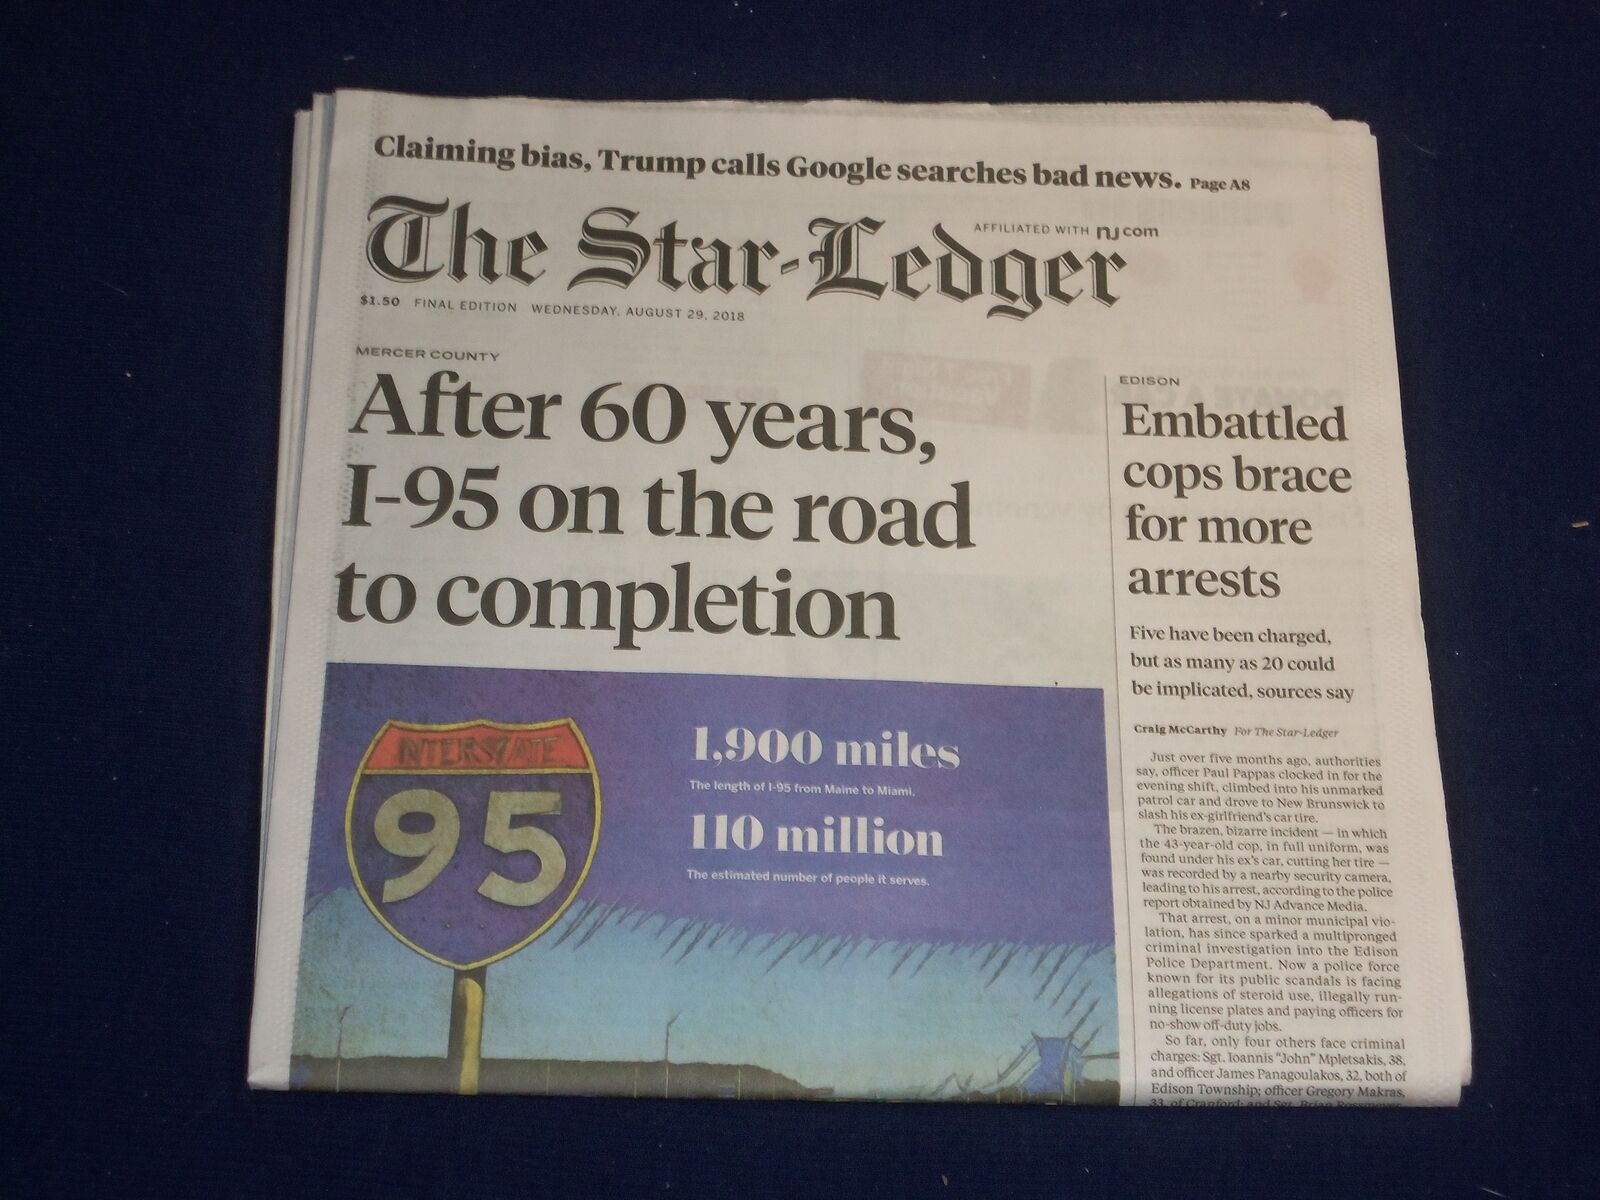 2018 AUGUST 29 STAR LEDGER NEWSPAPER - AFTER 60 YEARS I-95 ROAD TO BE FINISHED